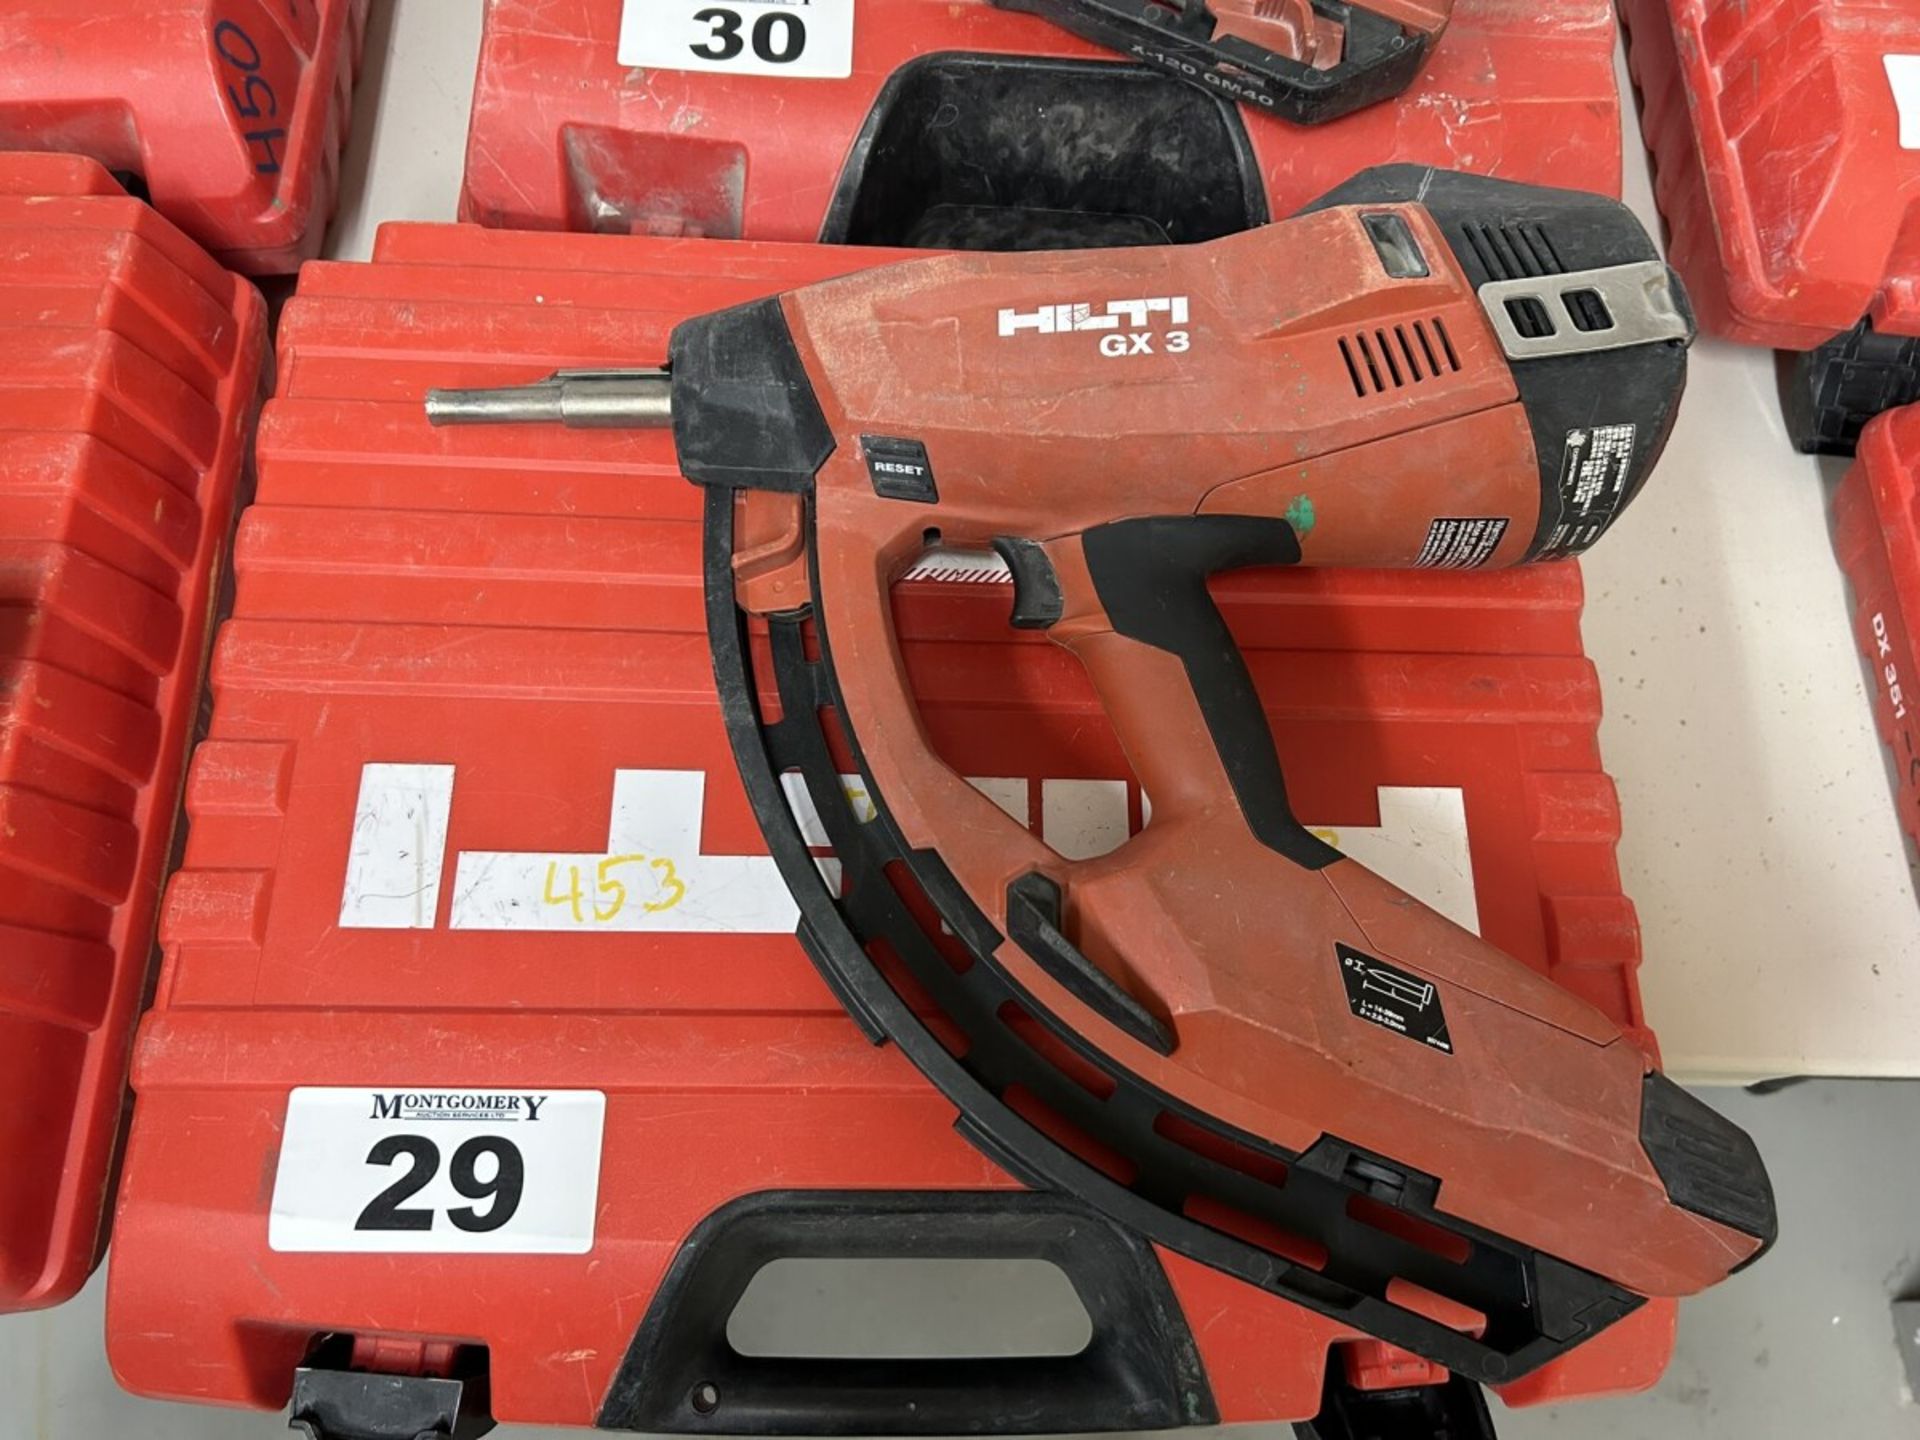 HILTI GX 3 GAS-ACTUATED FASTENING TOOL GAS NAILER WITH SINGLE POWER SOURCE FOR DRYWALL TRACK, - Image 2 of 7